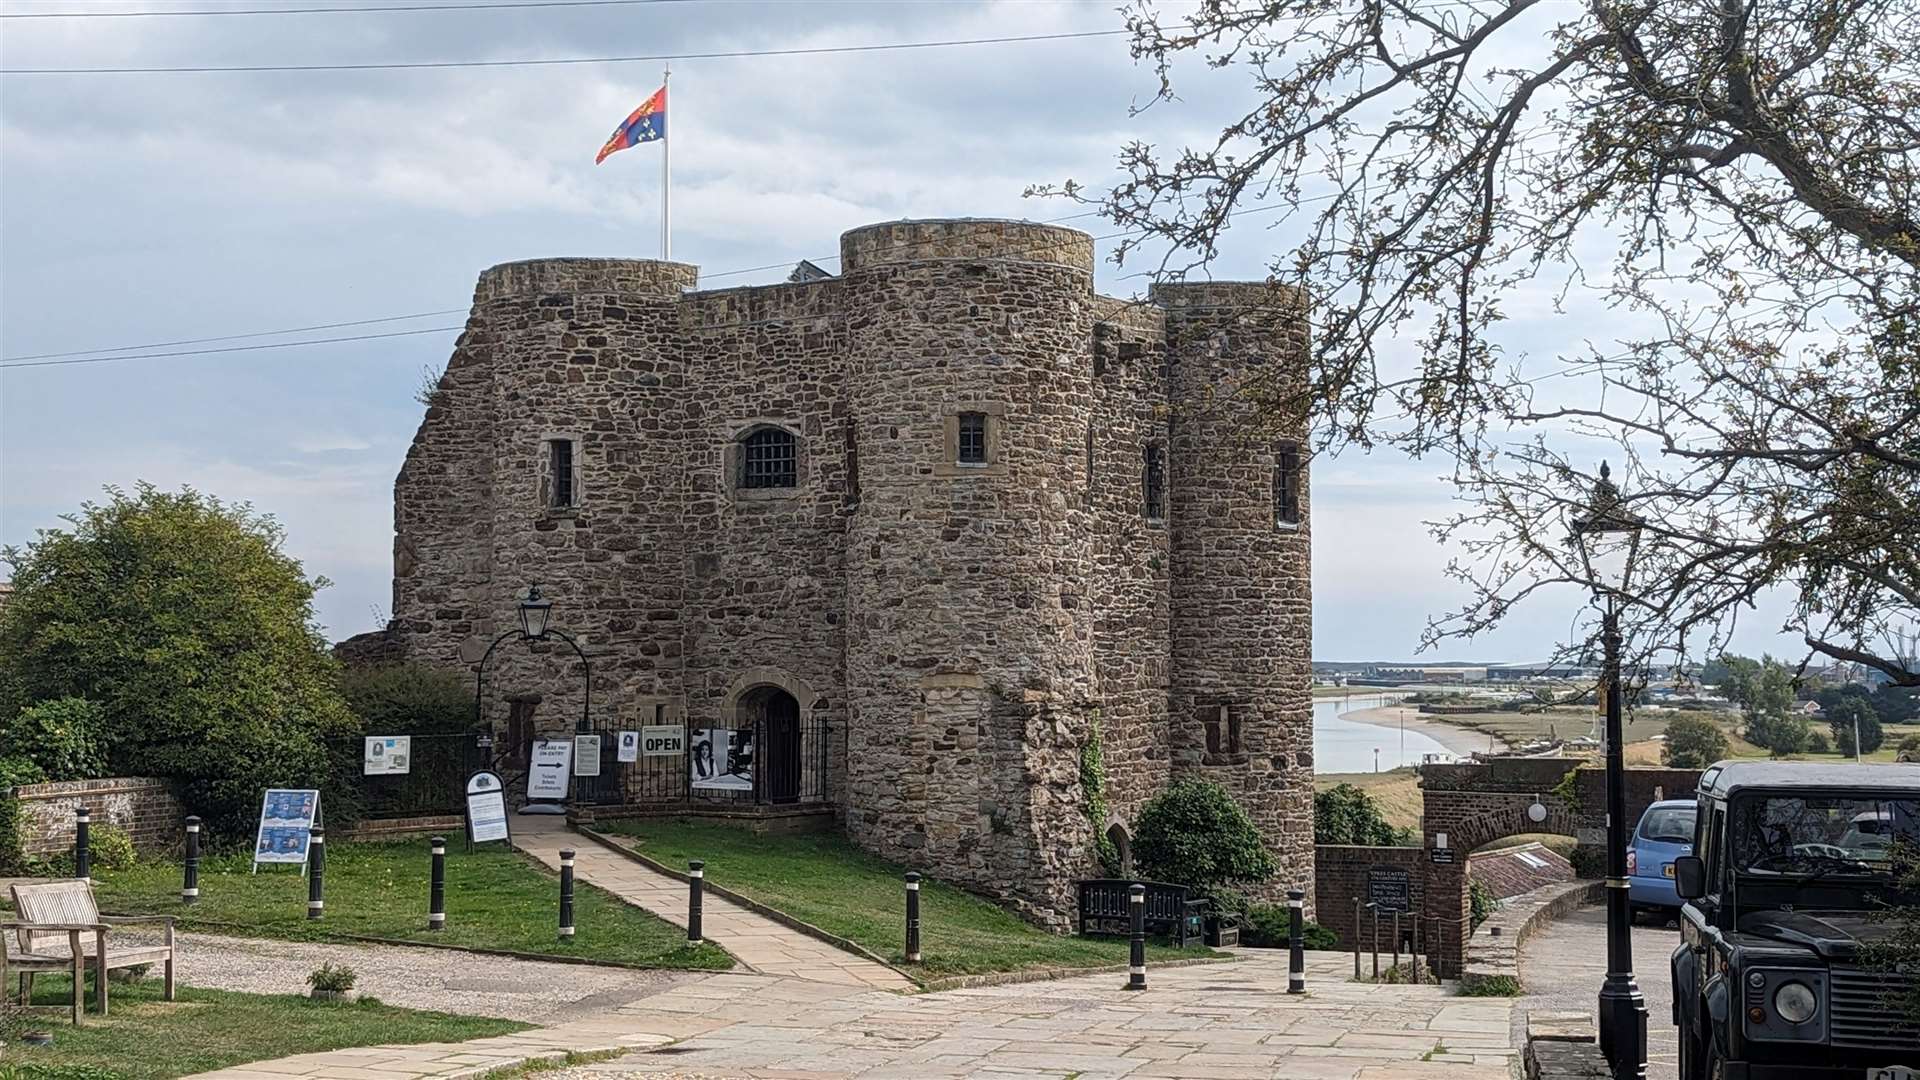 The Ypres Tower at Rye Castle